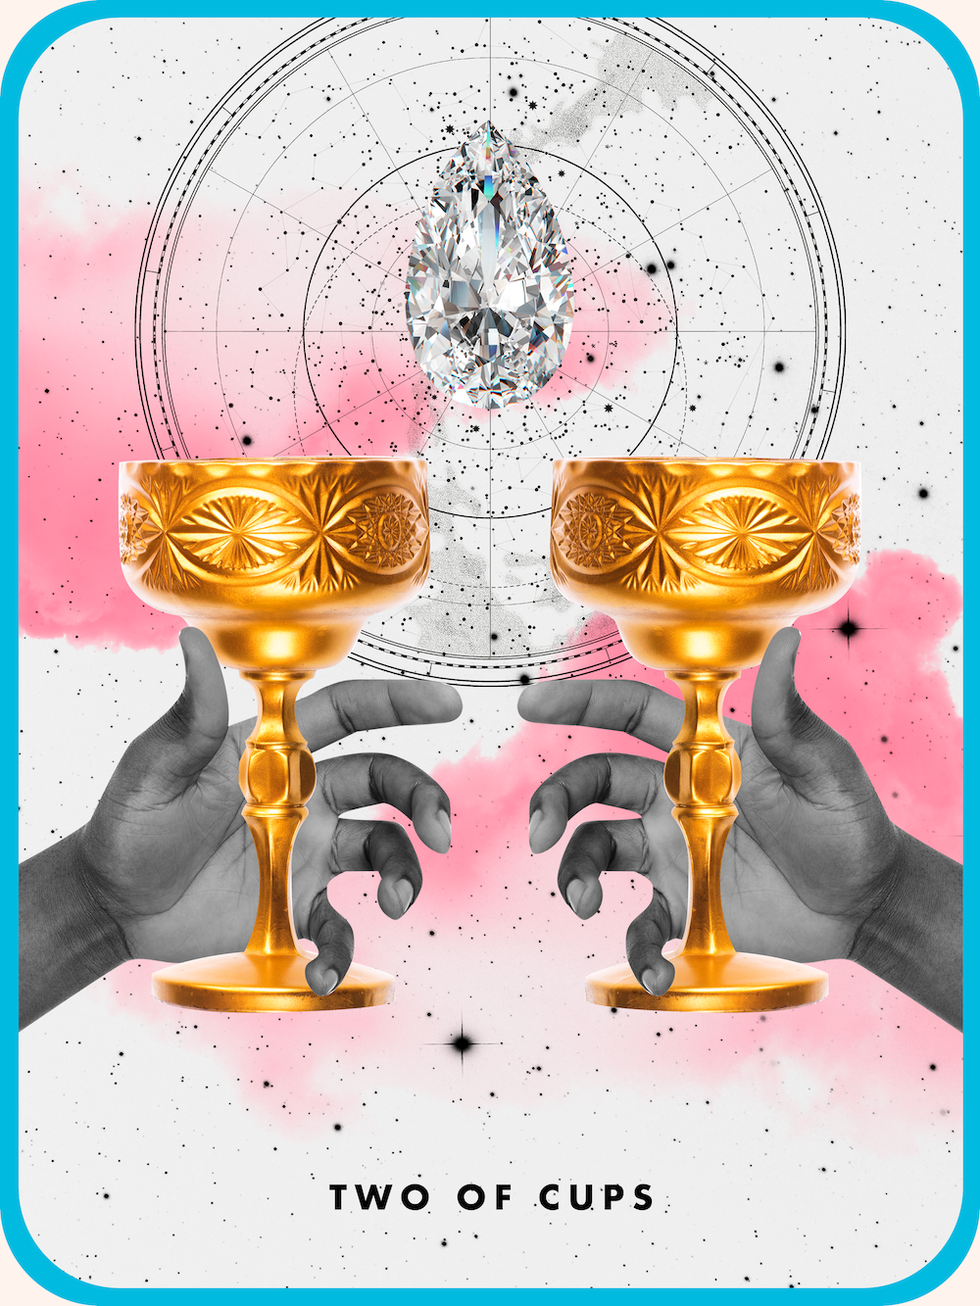 the two of cups tarot card, showing two hands holding golden goblets